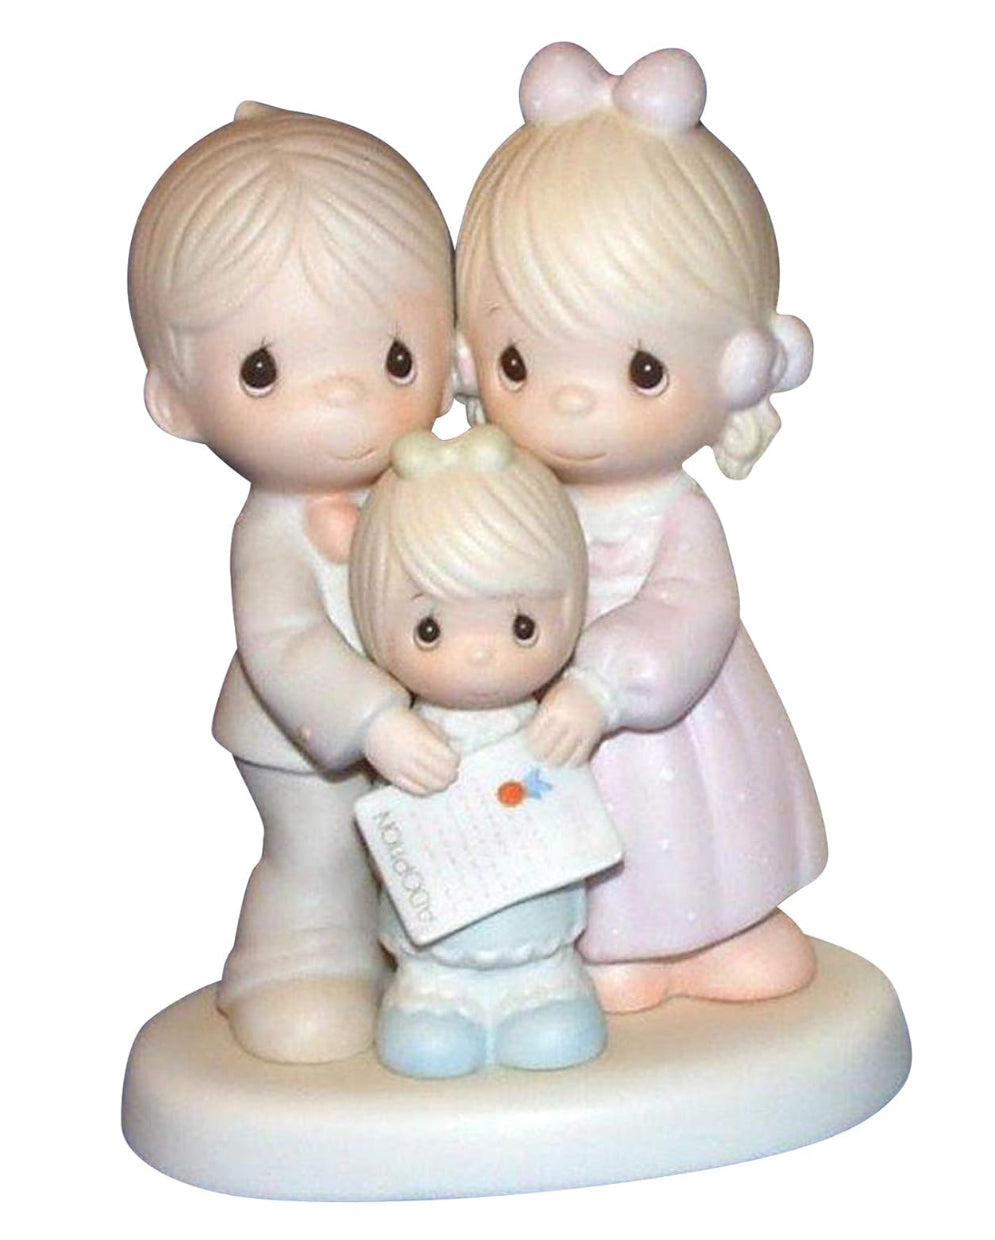 God Bless The Day We Found You (Girl) - Precious Moments Figurine 100145